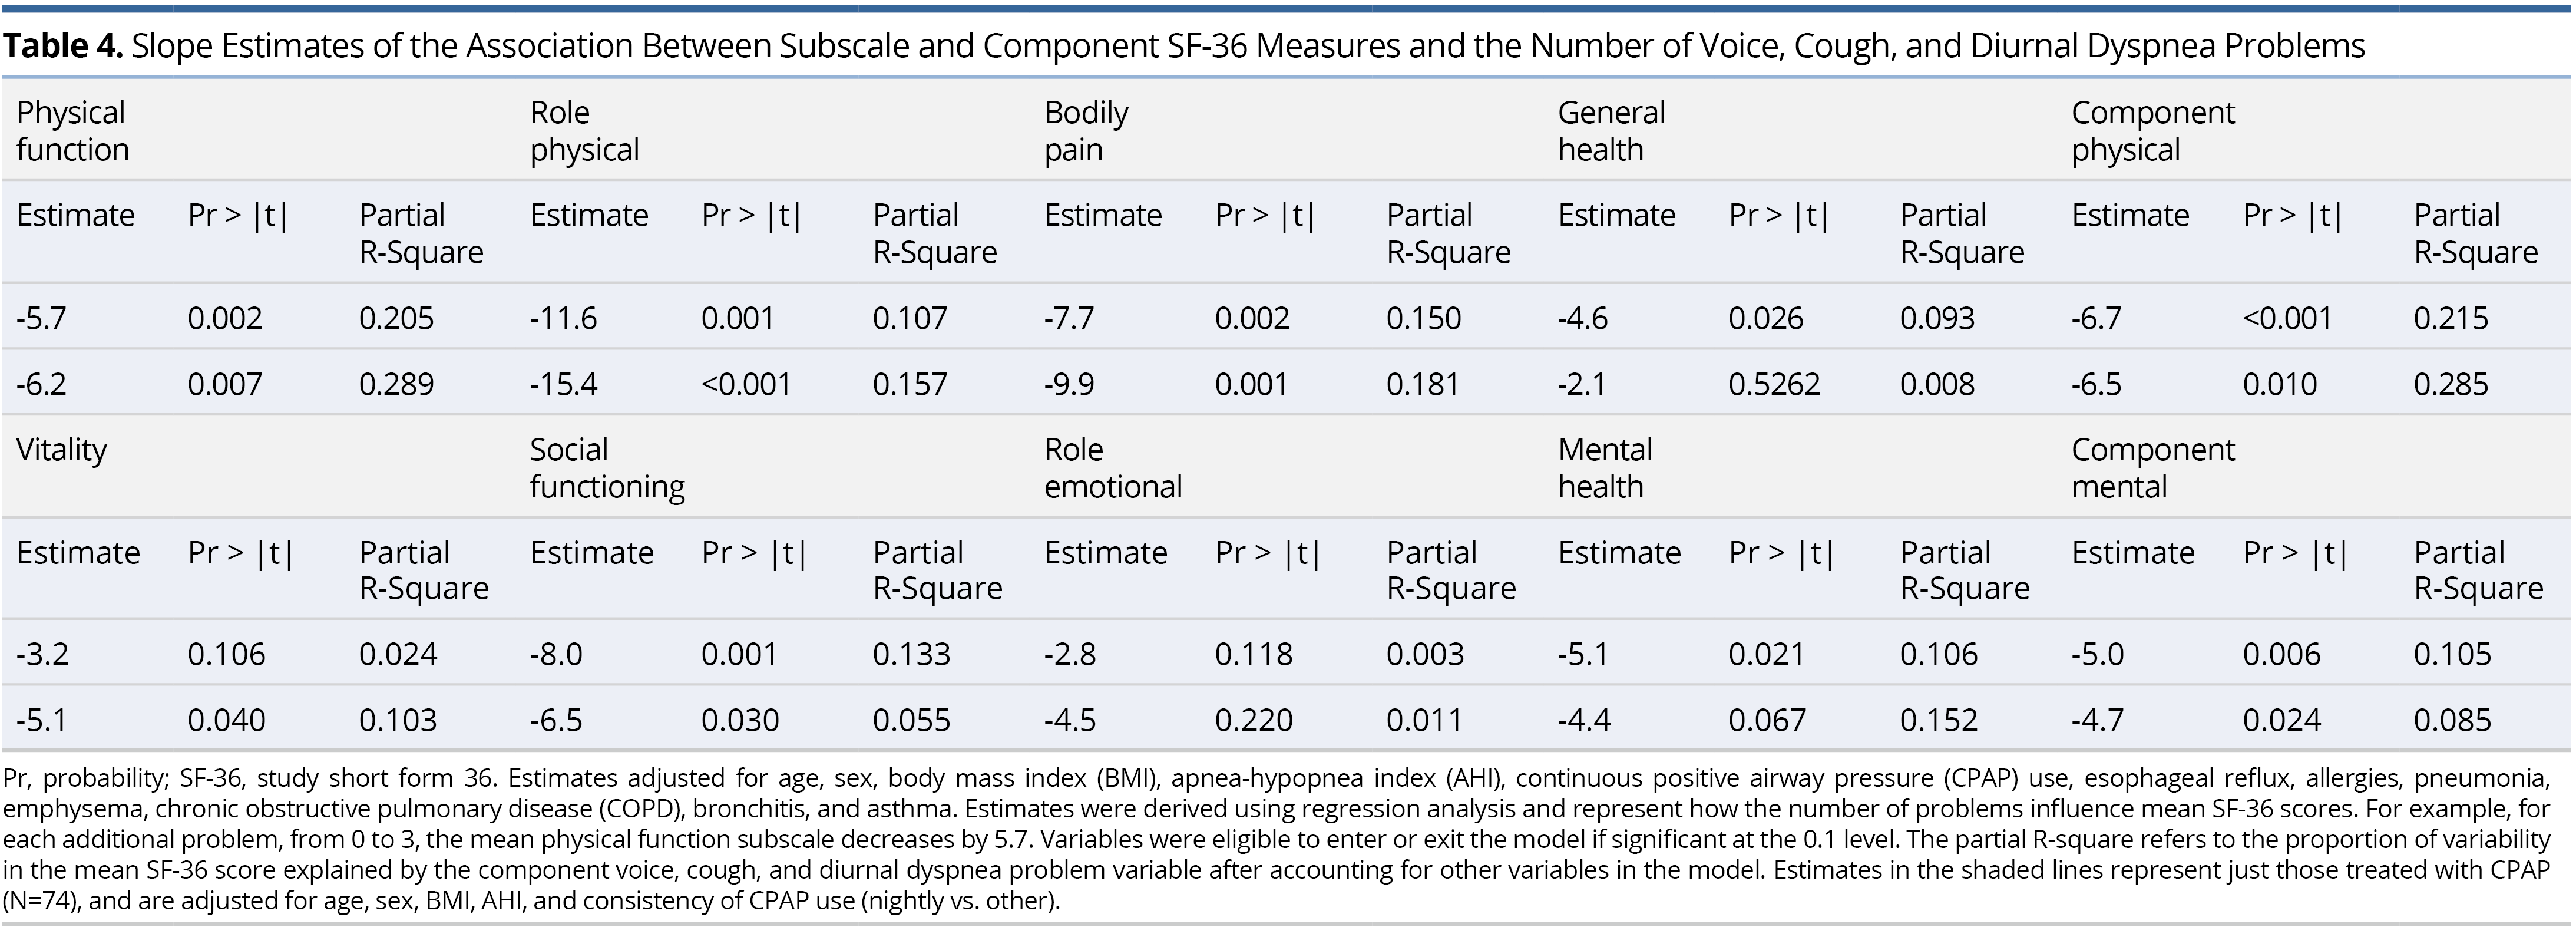 Table 4.pngSlope Estimates of the Association Between Subscale and Component SF-36 Measures and the Number of Voice, Cough, and Diurnal Dyspnea Problems